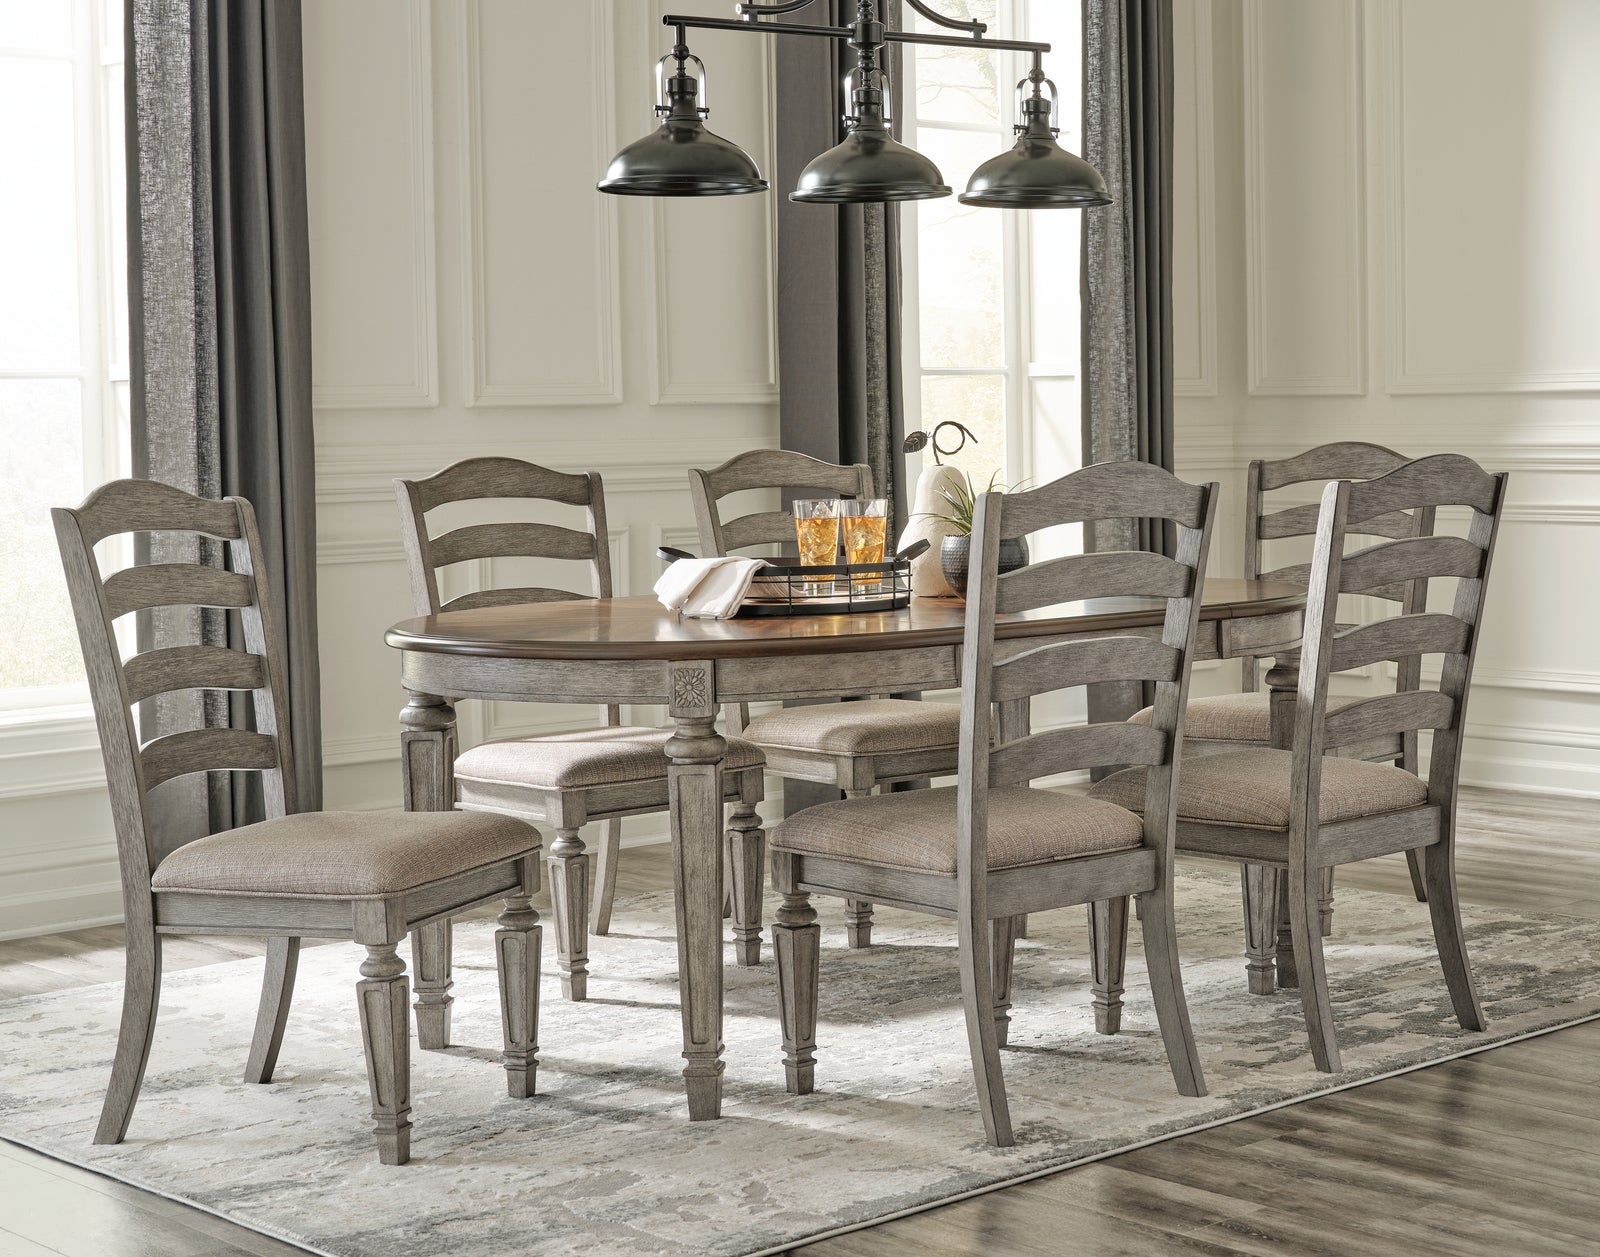 Lodenbay Two-tone Oval Dining Room Set